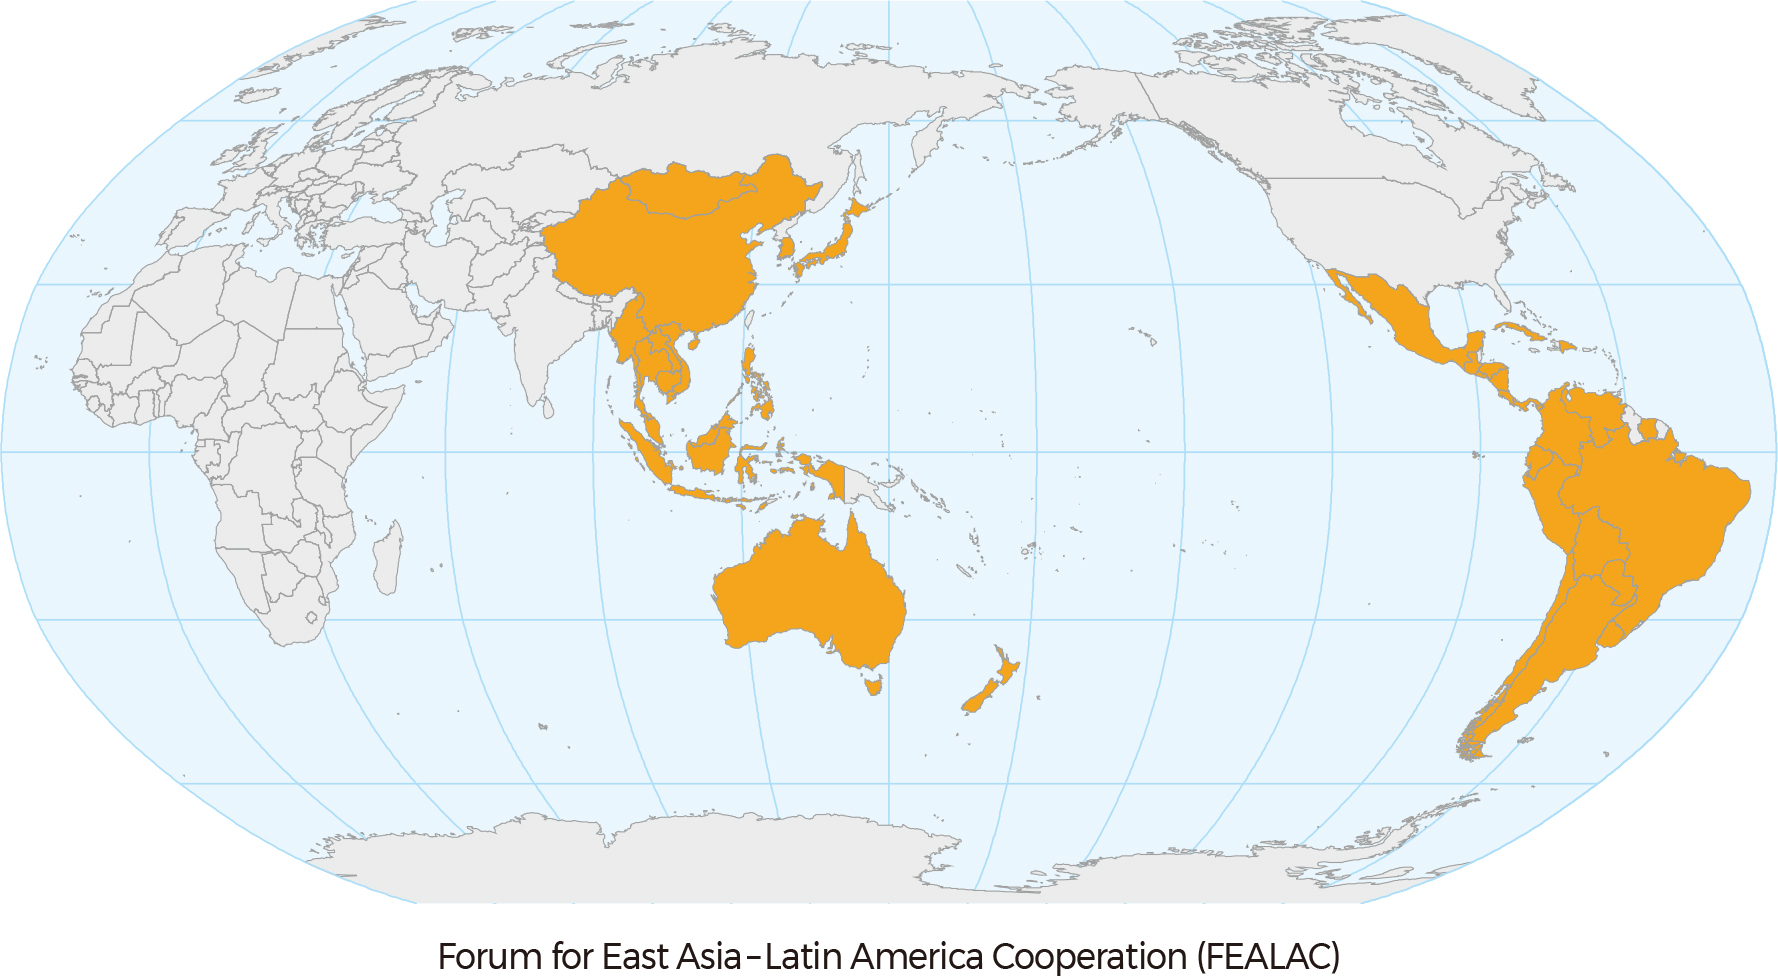 Forum for East Asia – Latin America Cooperation (FEALAC)